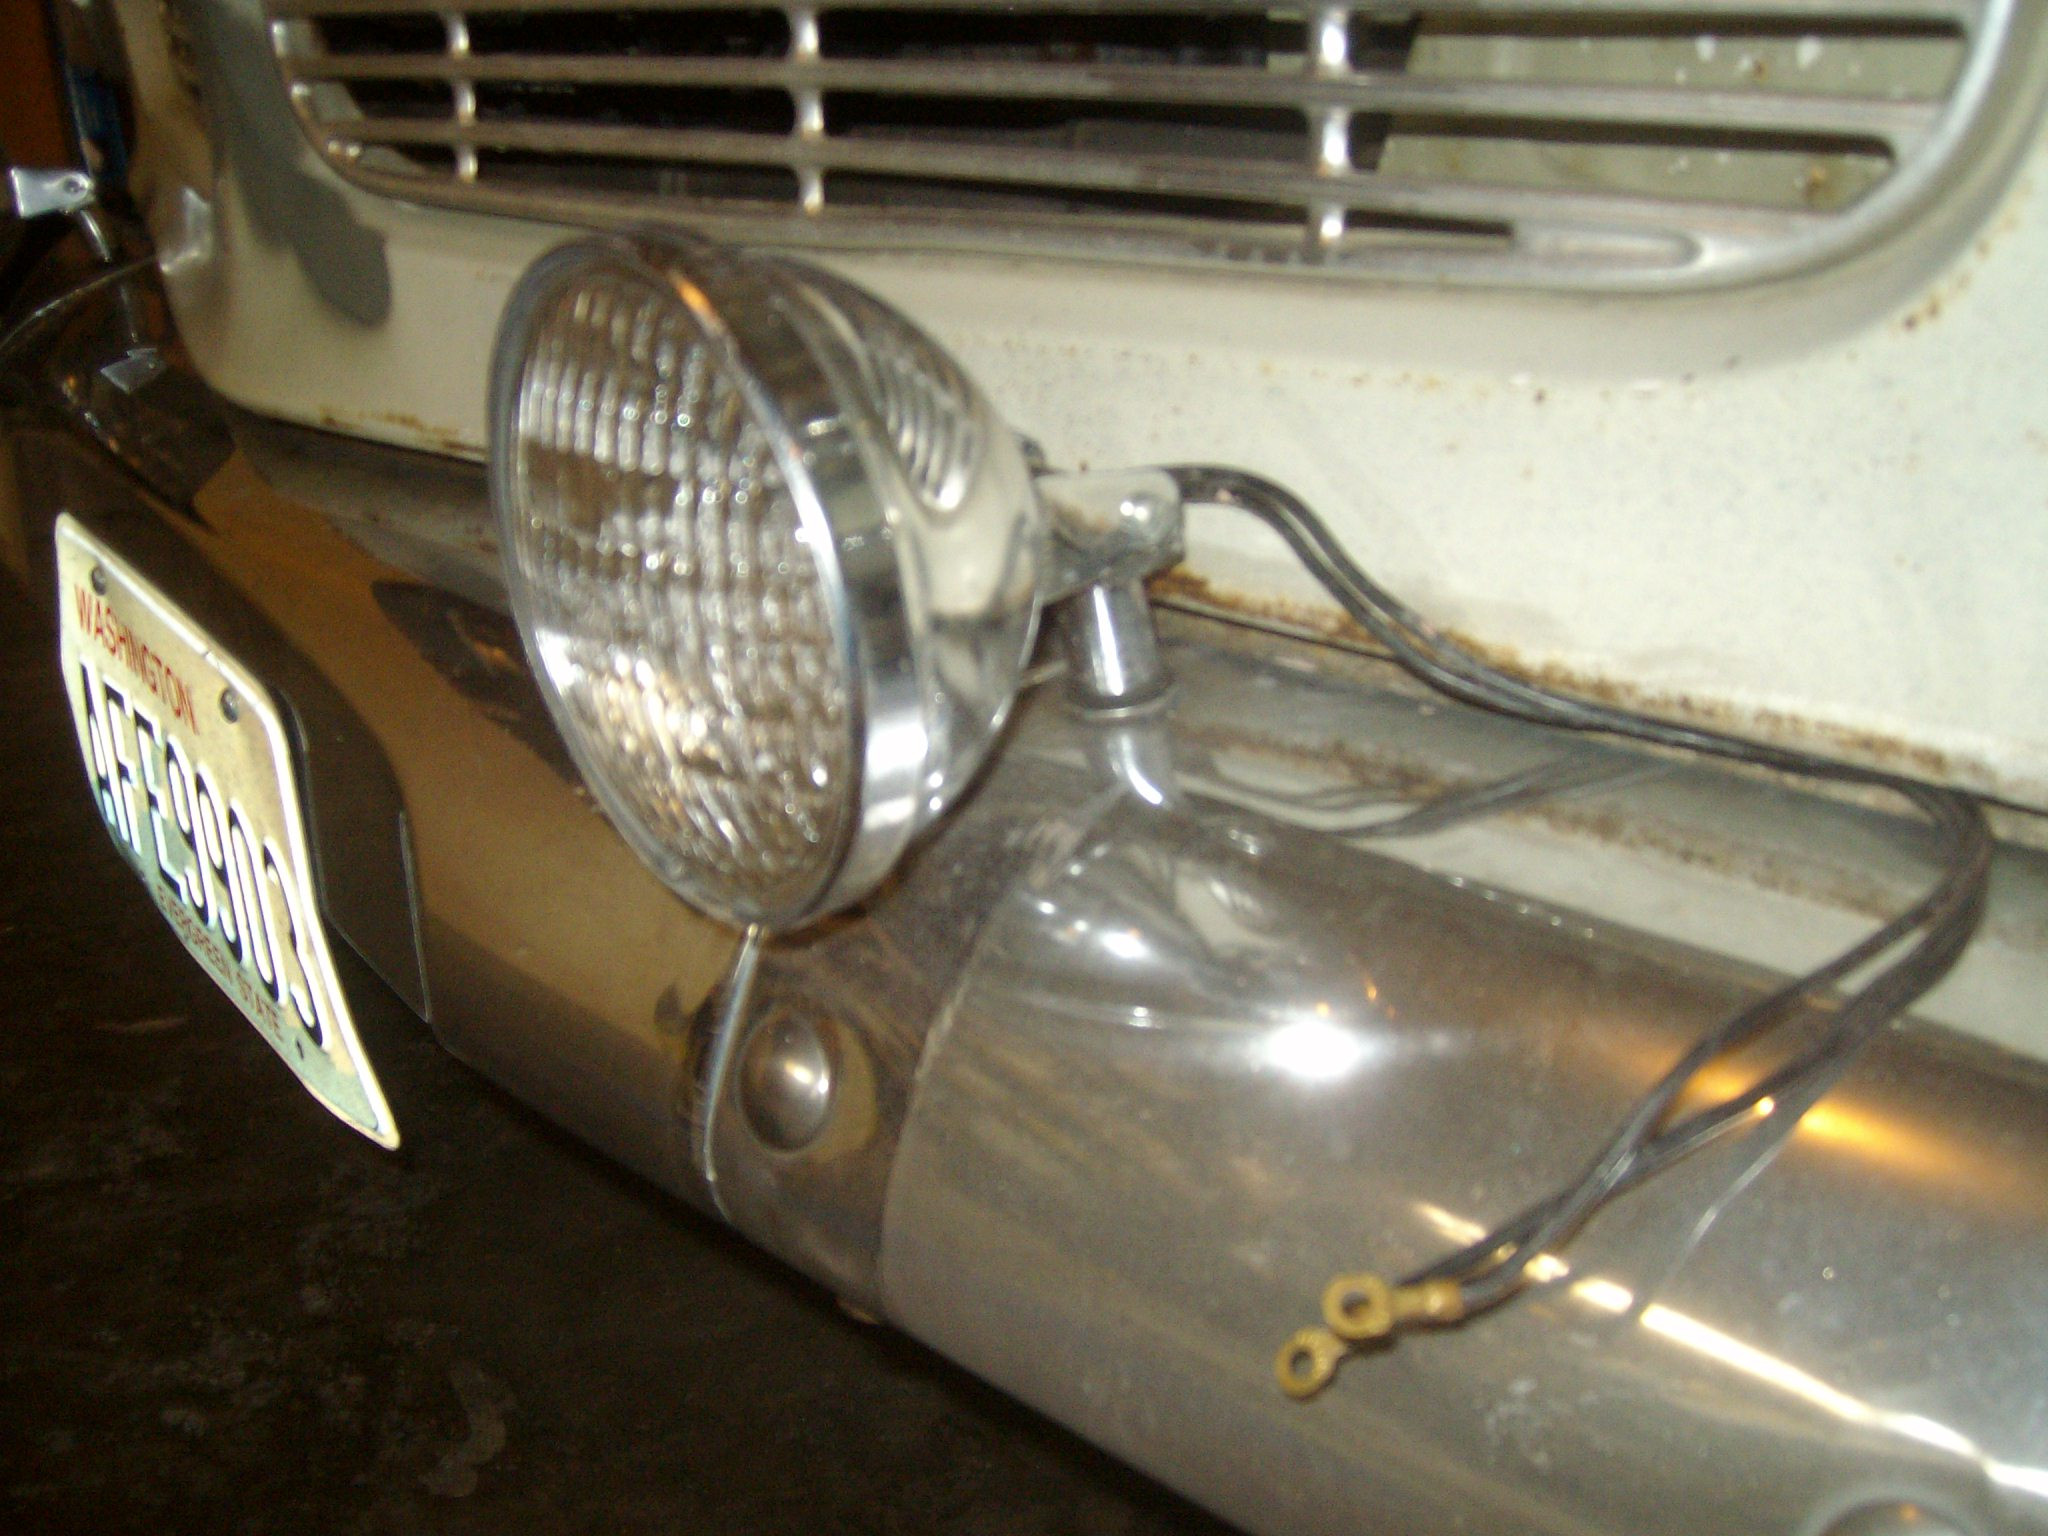 Add Fog Lamps to Classic Car by Relay Wiring How to Wire Driving / Fog Lights (www.mossmotors.com) â Mogsouth